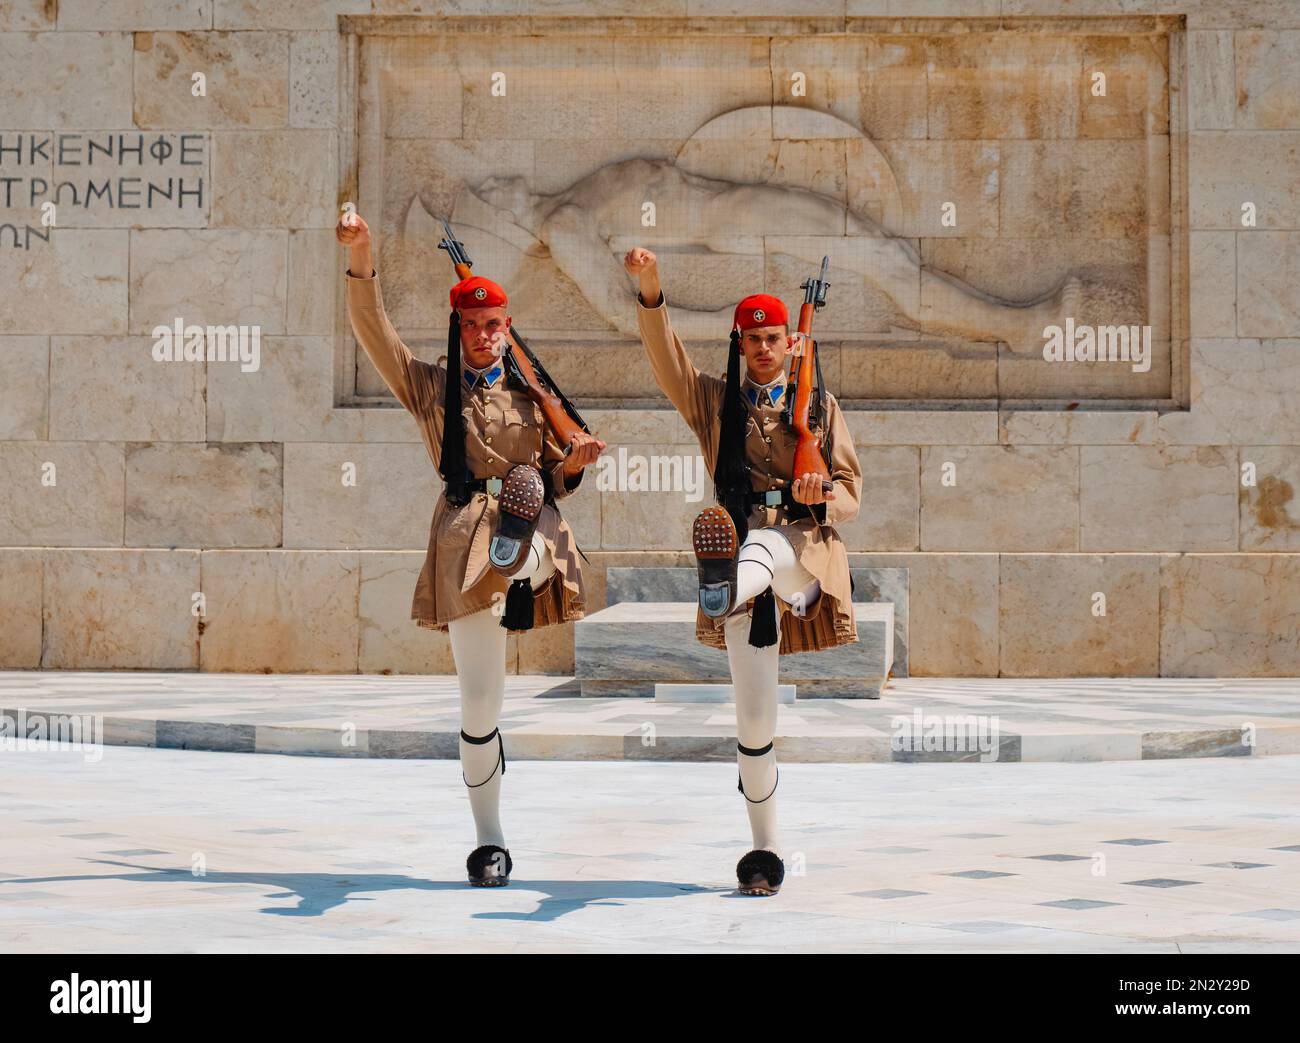 Athens, Greece - August 30, 2022: A moment of the changing of the guard at the Tomb of the Unknown Soldier in Athens, Greece, when the two Evzones mar Stock Photo